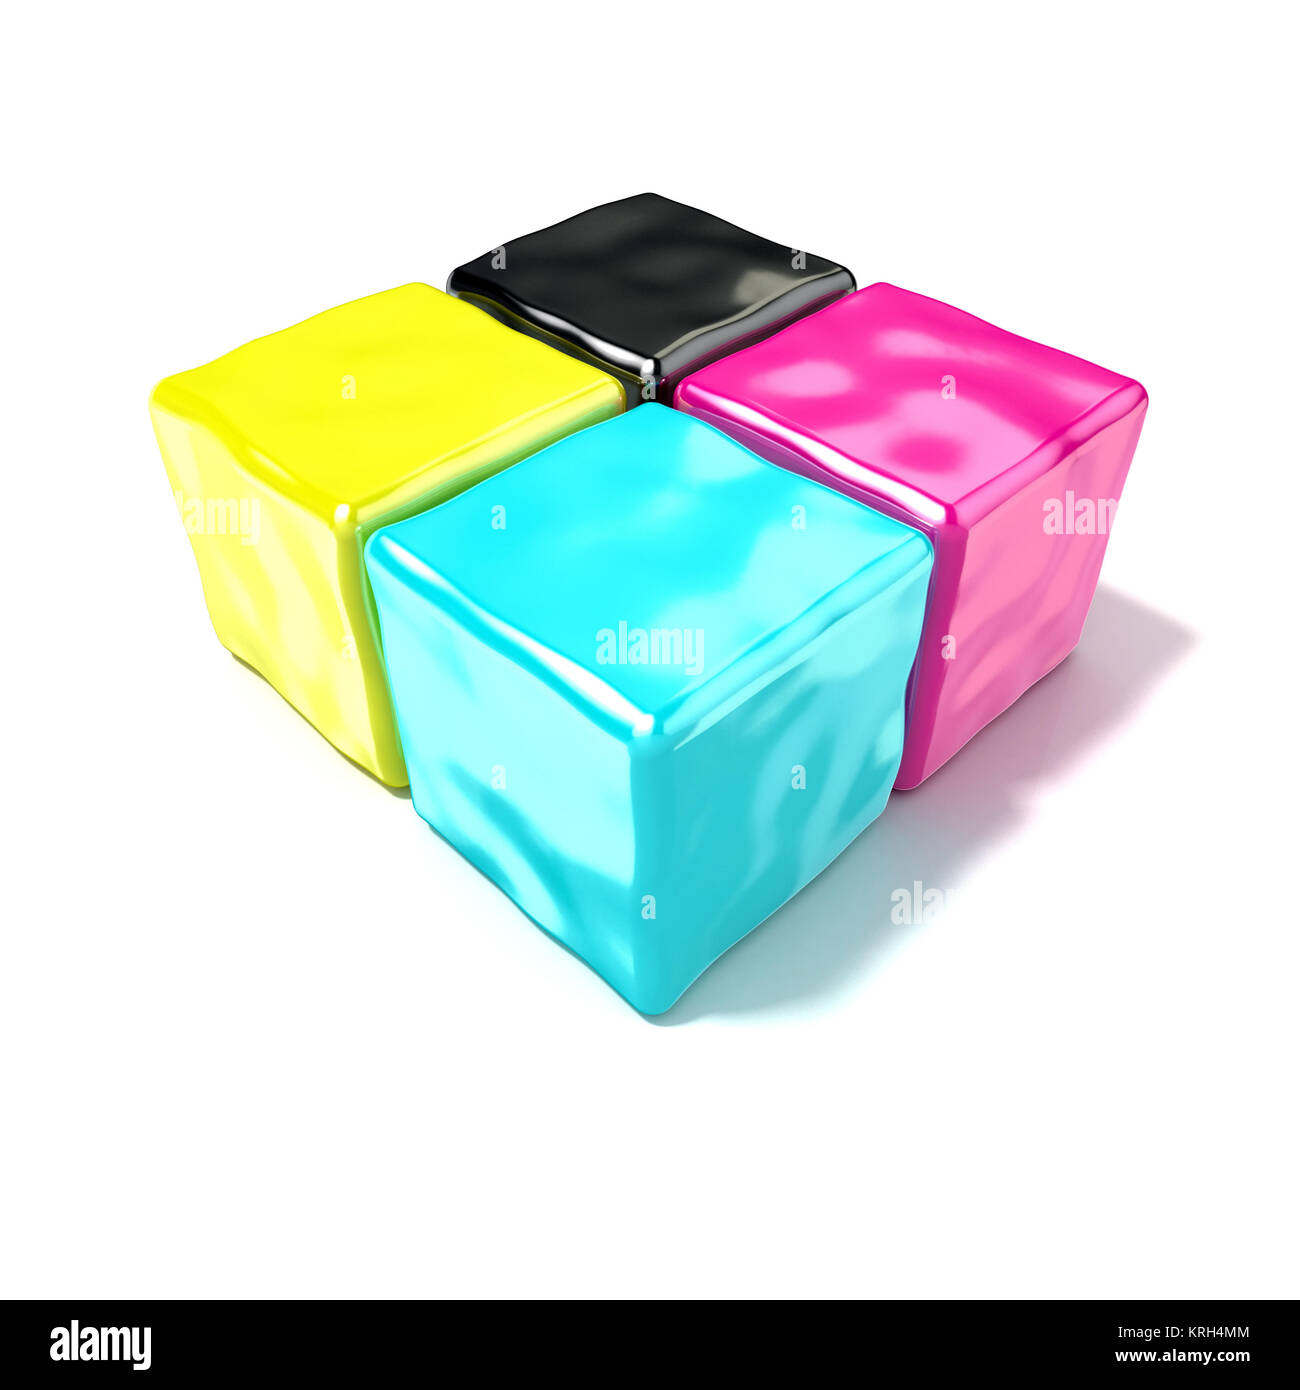 CMYK cubes sign, like symbol of printing. 3D Stock Photo